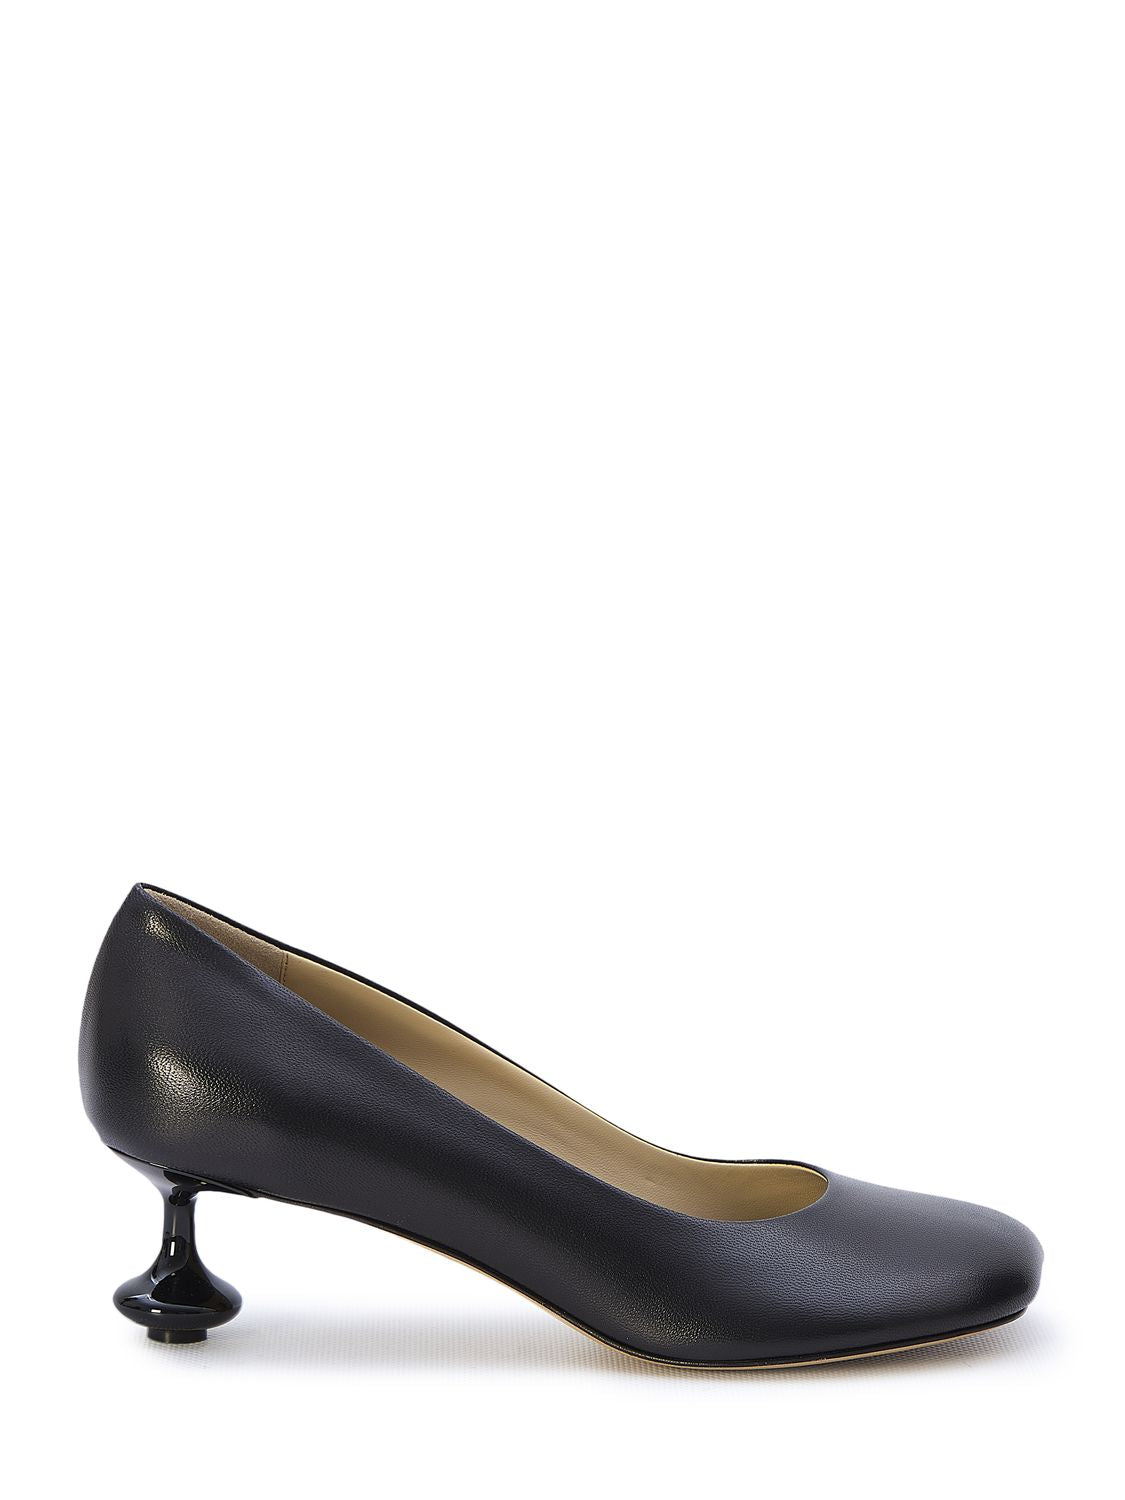 LOEWE Petite Black Toy Pumps with a Darling Lacquered Heel